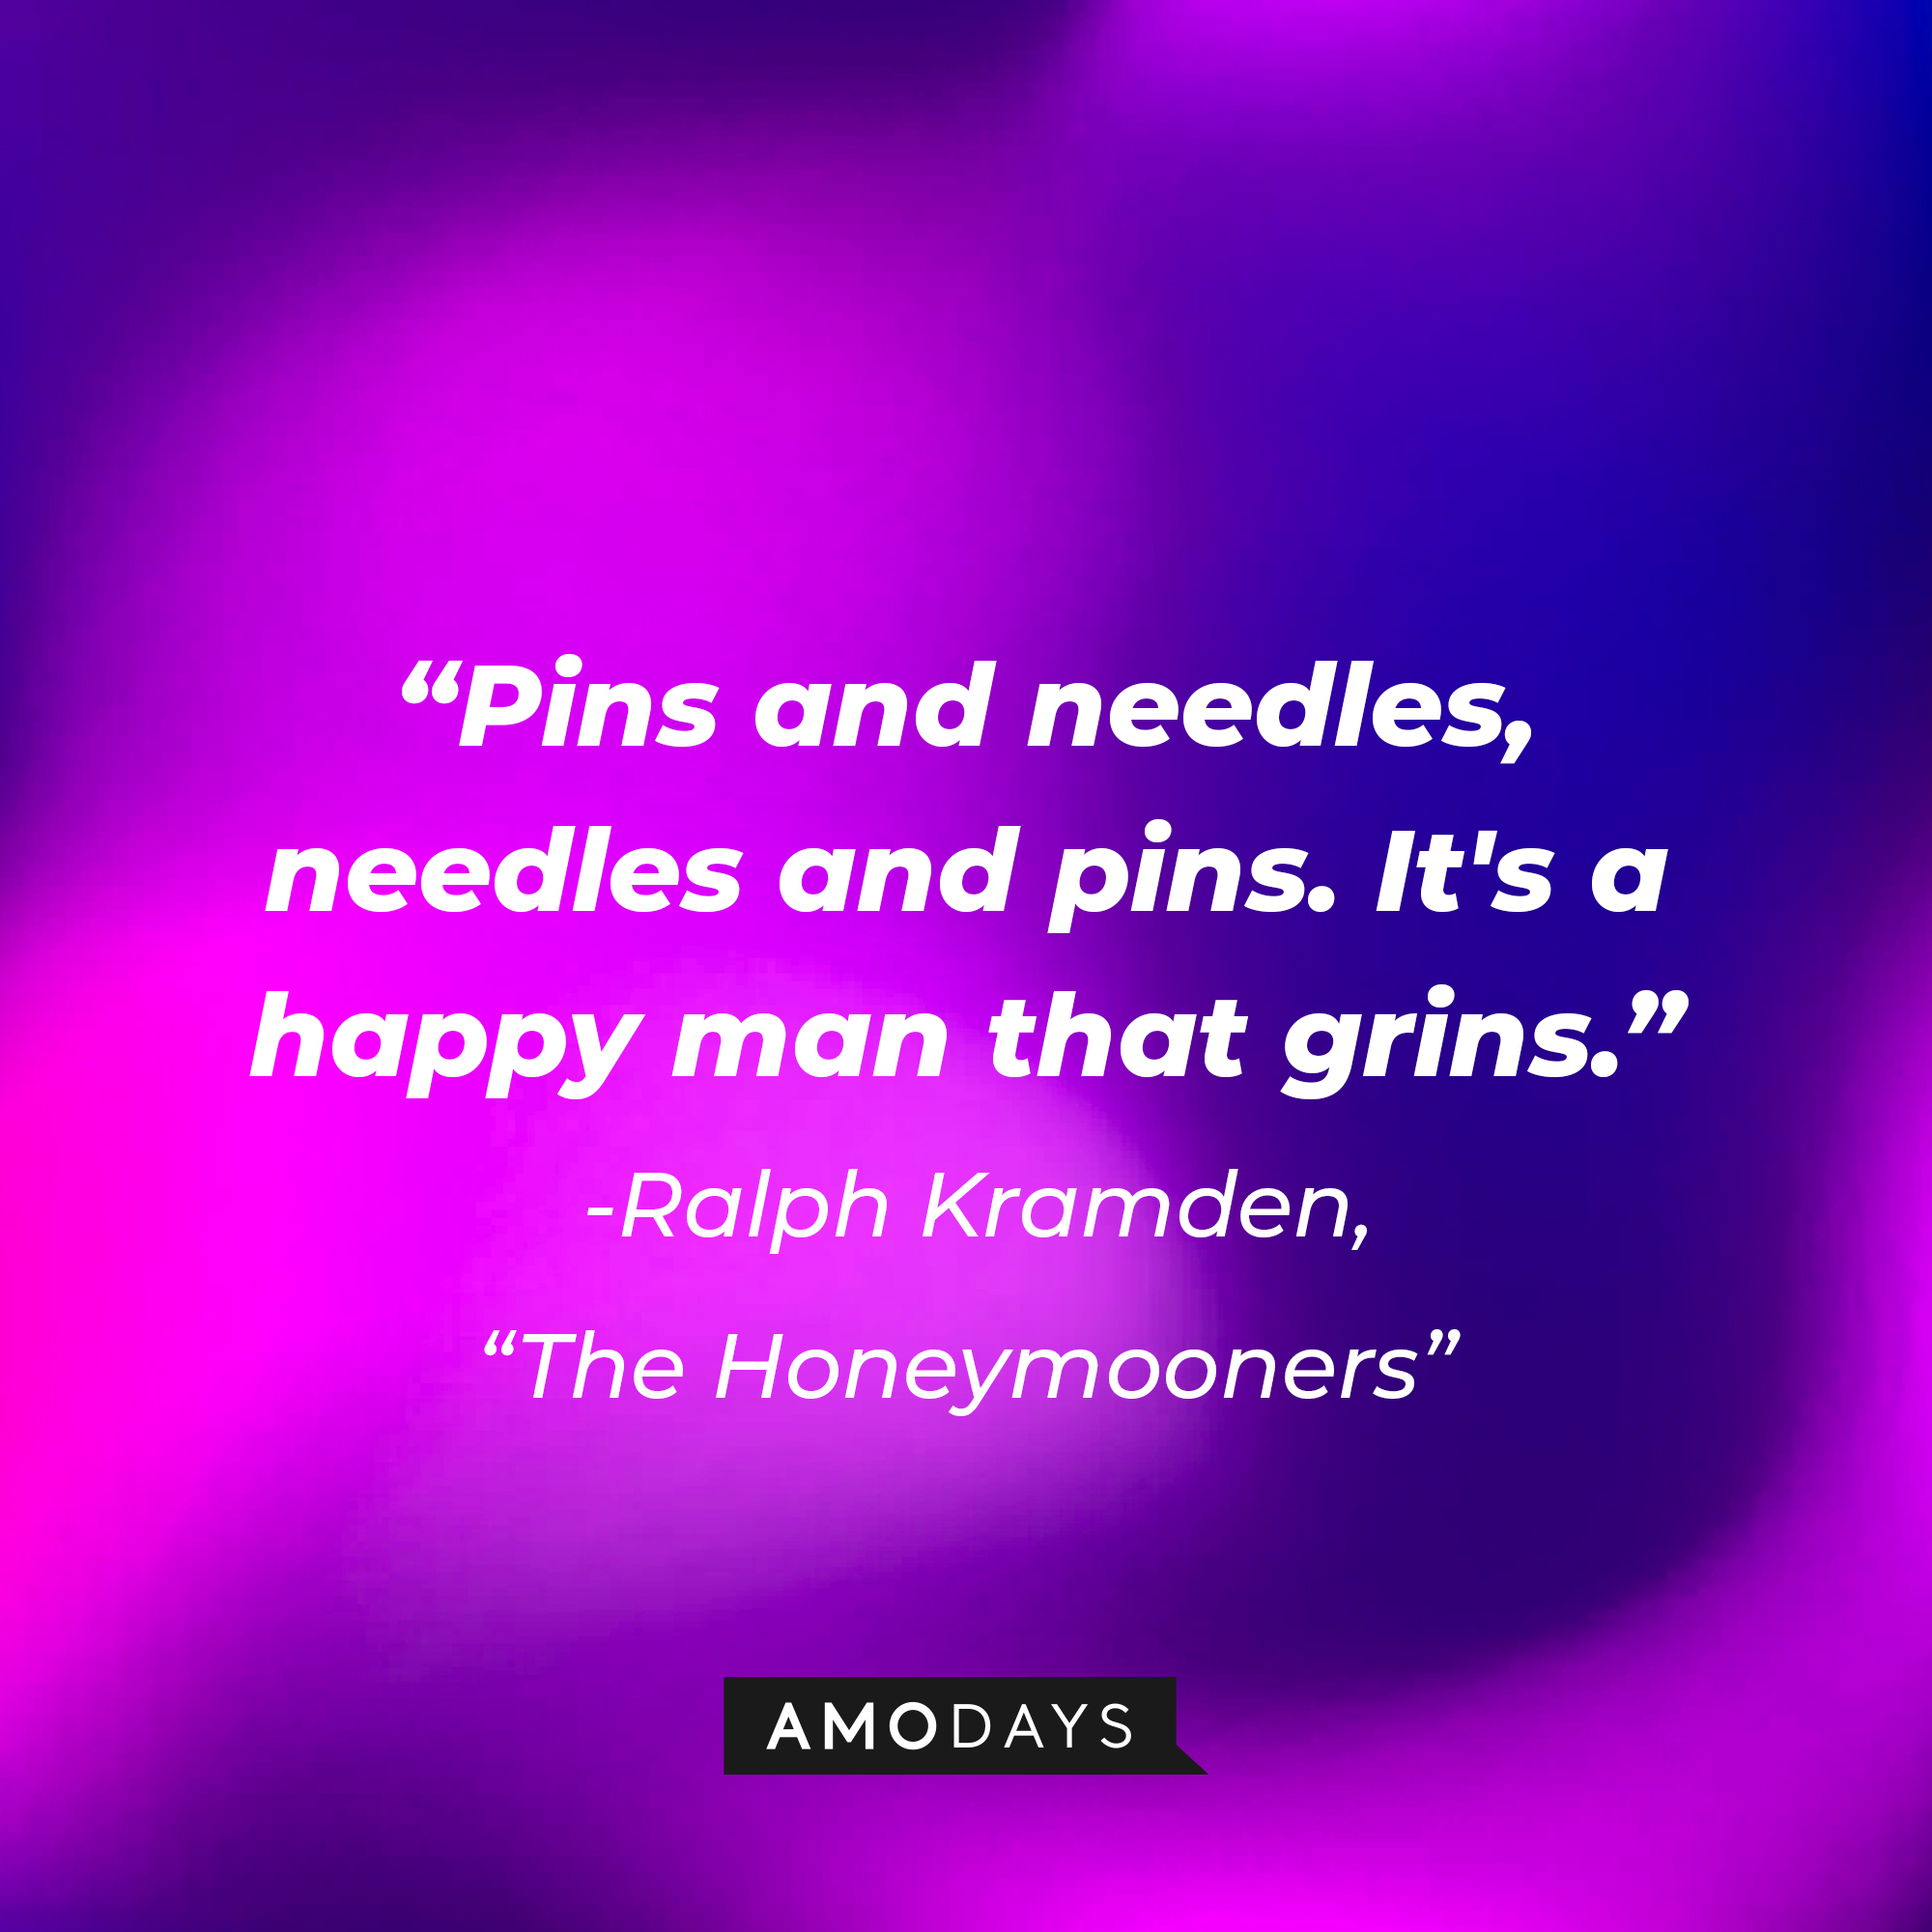 A quote from "The Honeymooners" star Ralph Kramden: "Pins and needles, needles and pins. It's a happy man that grins." | Source: AmoDays